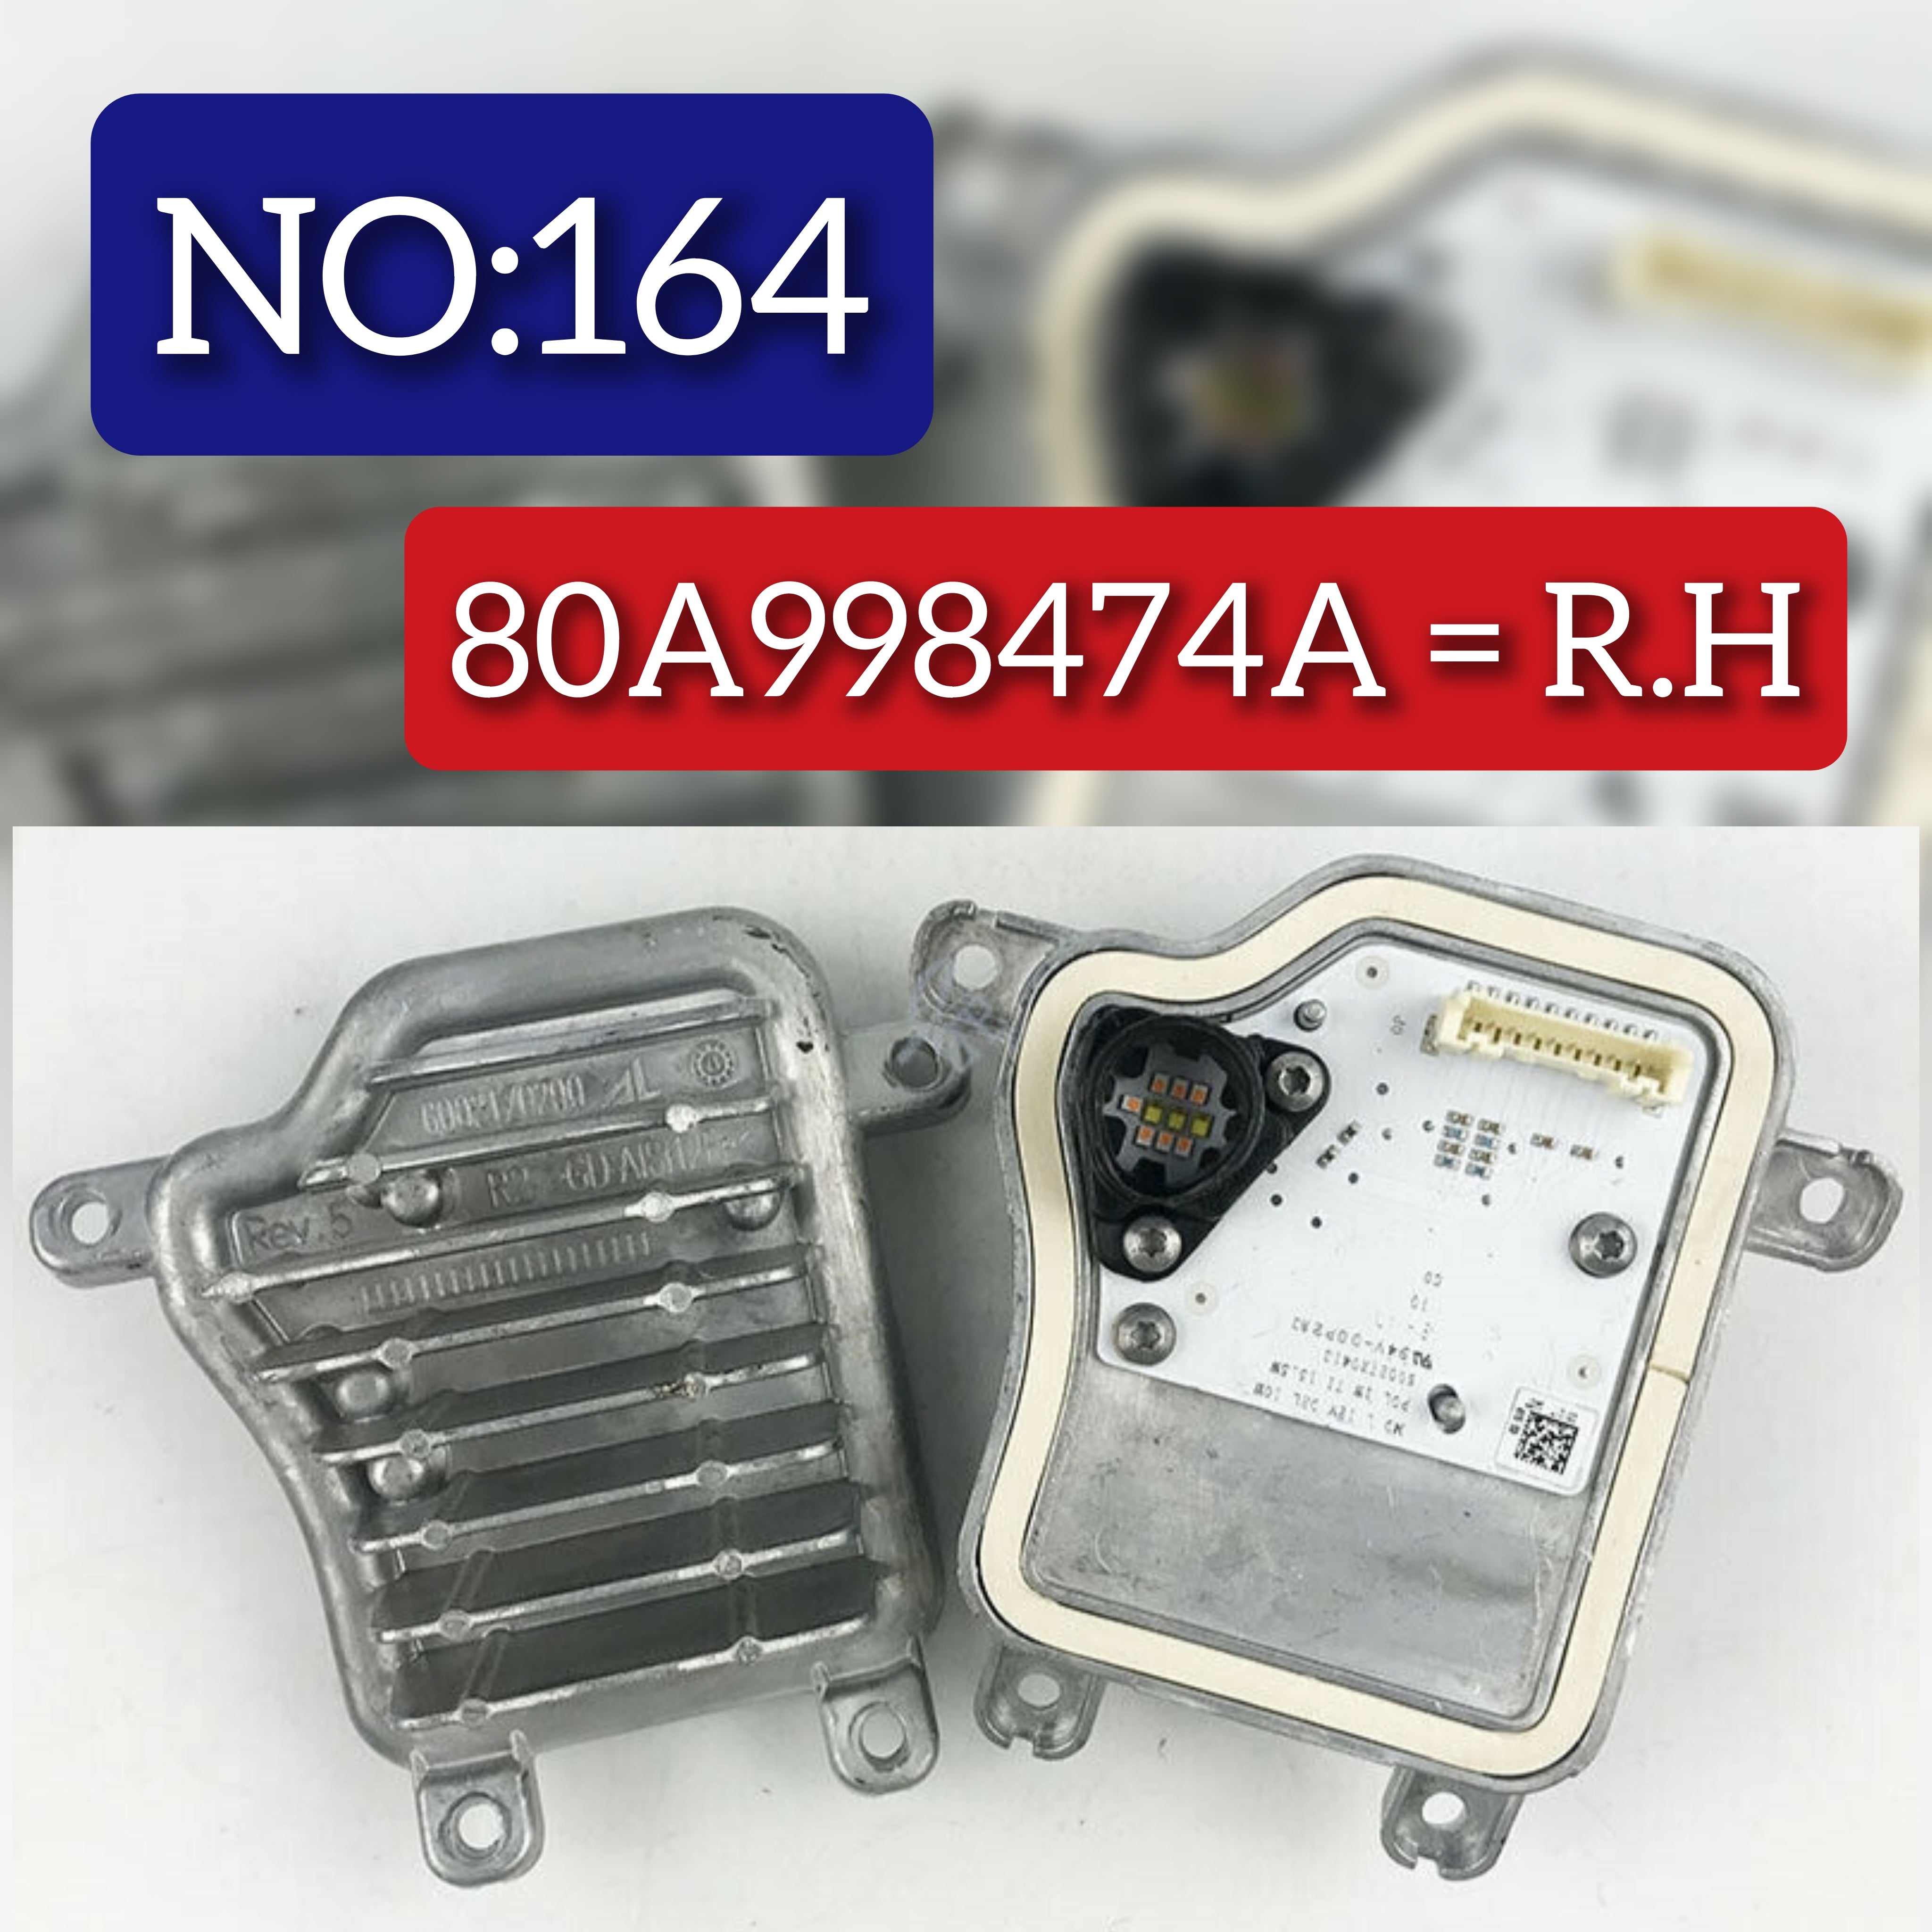 RIGHT DayTime Running DRL LED Control Module 80A998474A (R.H) Right For AUDI Q5 Tag-BL-164